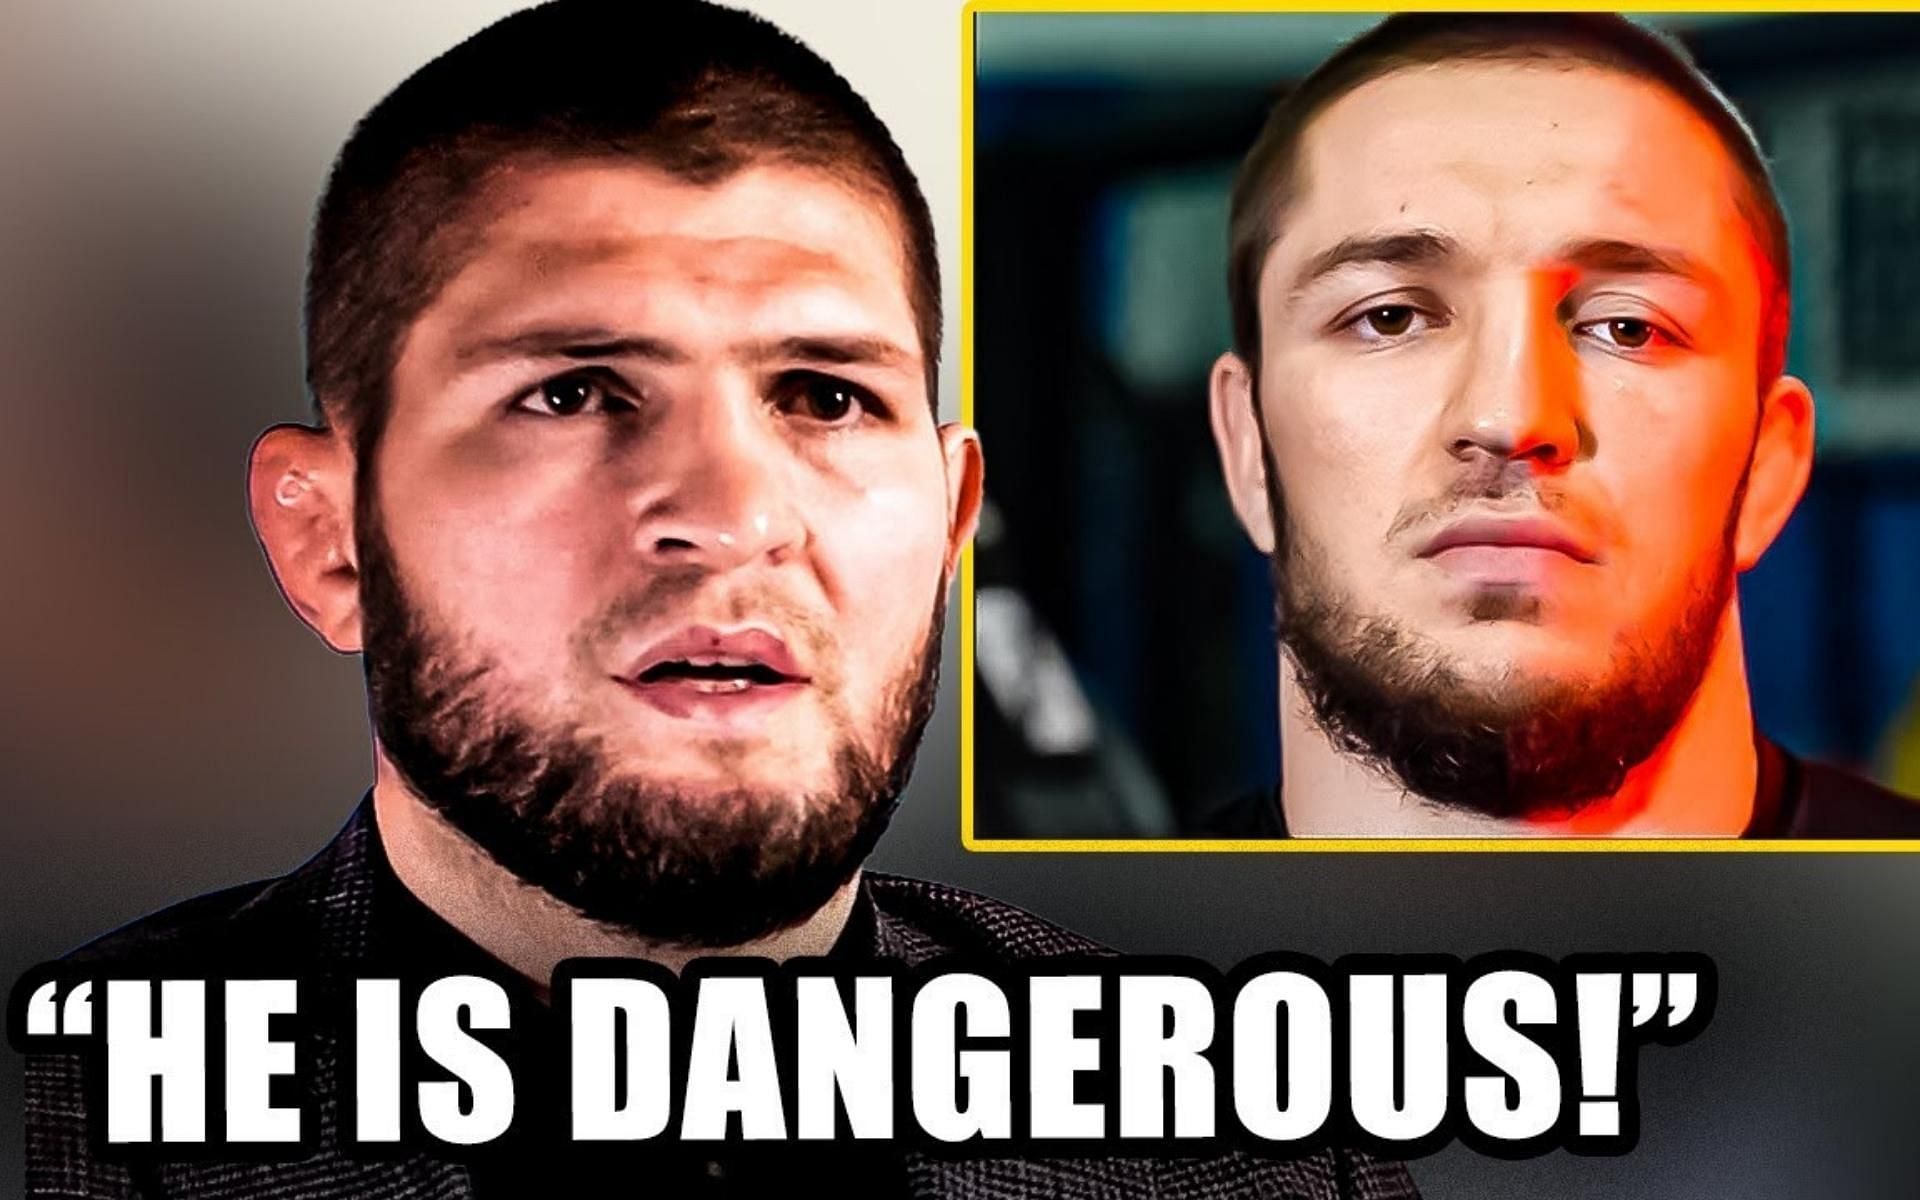 Khabib Nurmagomedov (right) talks about the ONE Championship debut of his prot&eacute;g&eacute; Saygid Izagakhmaev (left). (Image courtesy of ONE Championship)